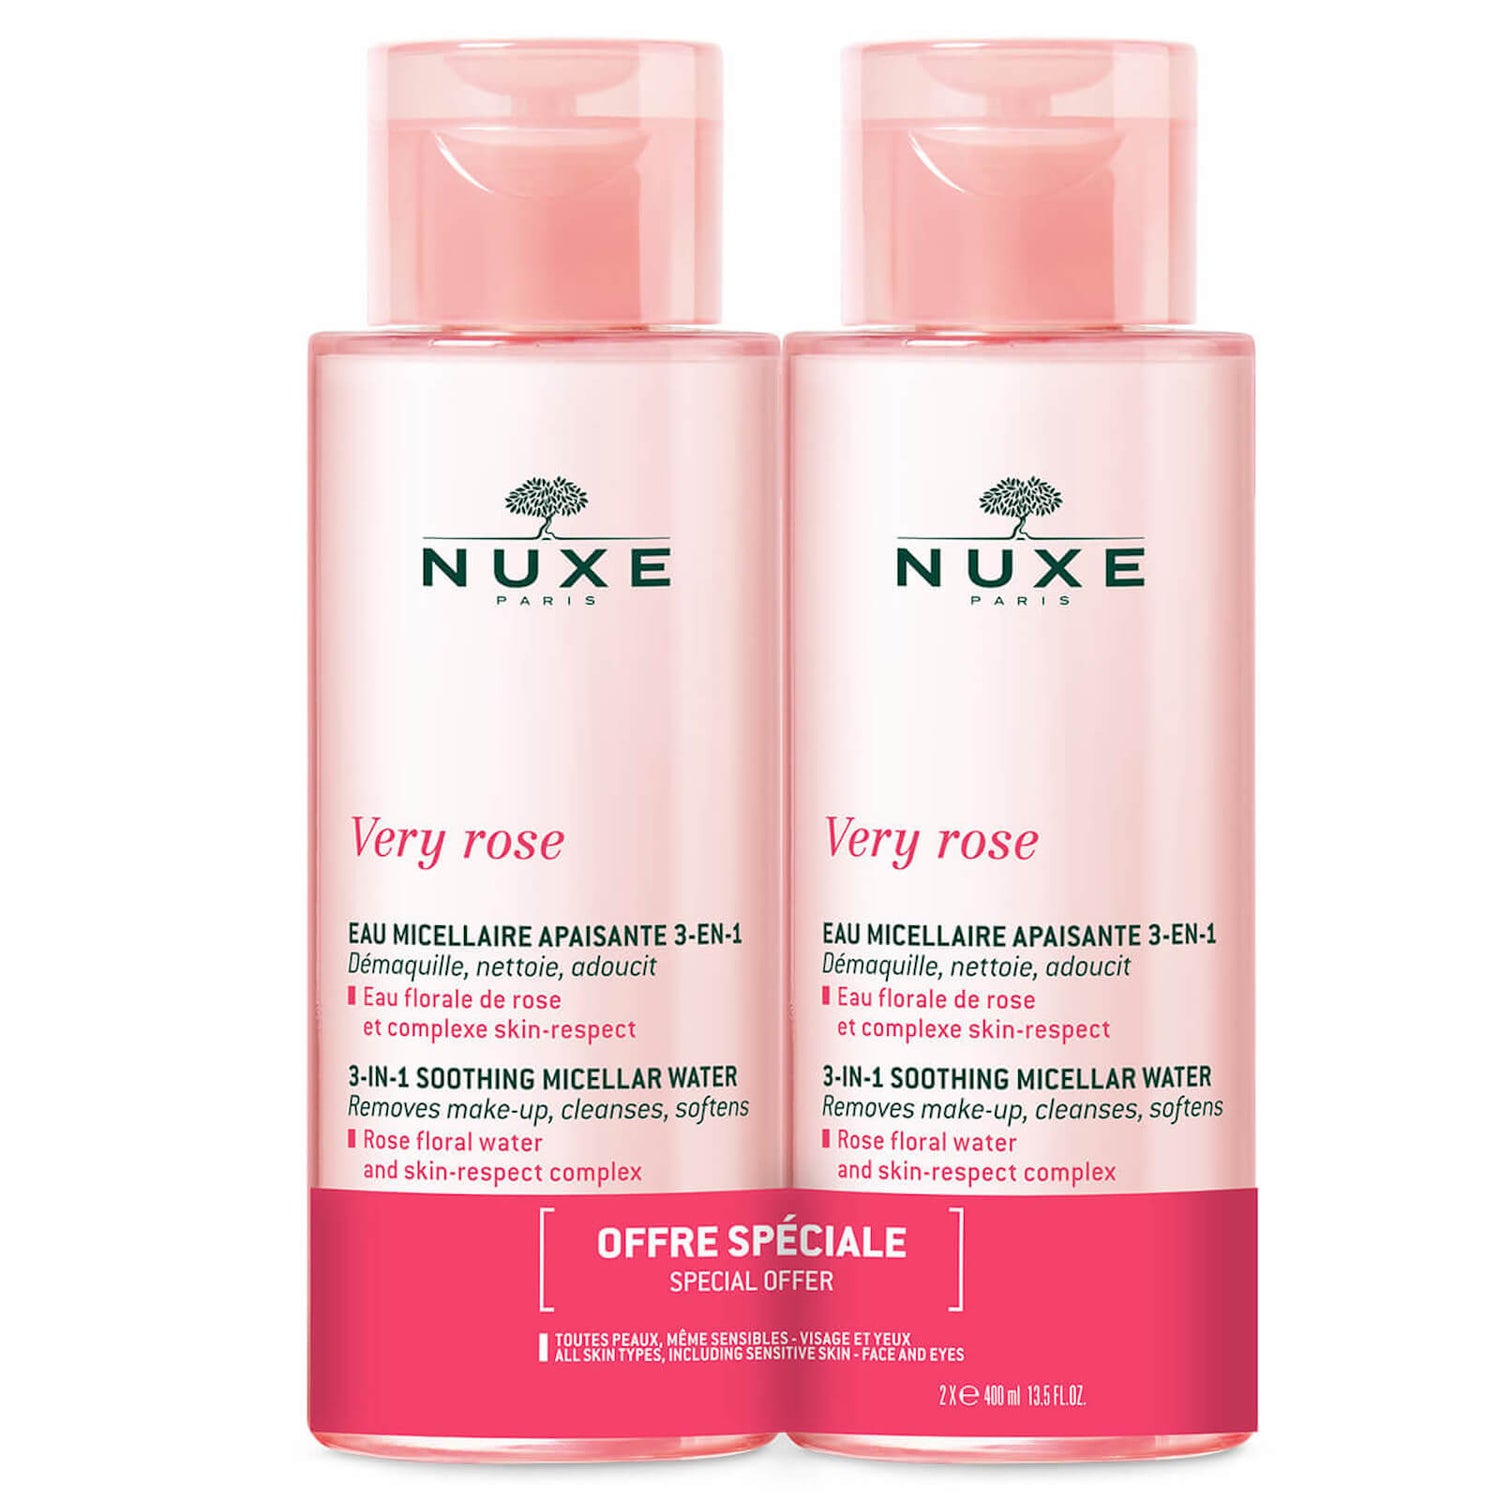 Duo Acqua Micellare Very Rose 3-in-1 Soothing NUXE 2 x 400ml